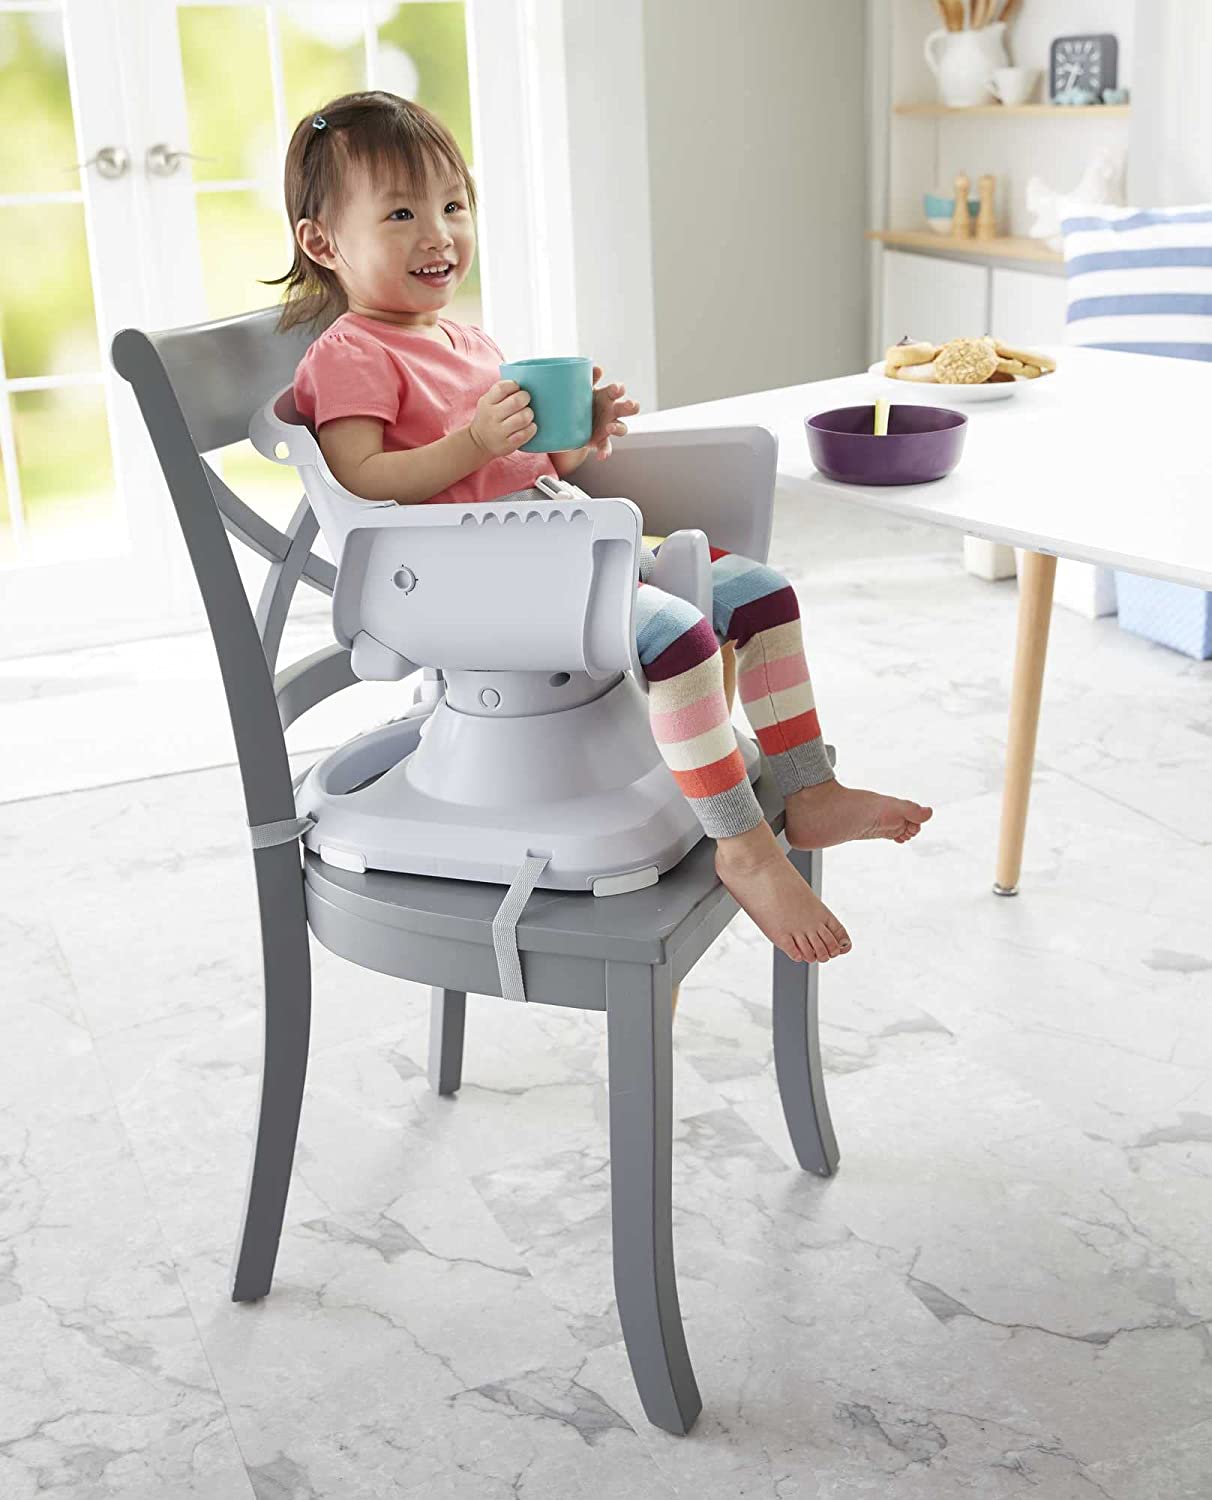 Fisher-Price SpaceSaver High Chair, Diamond Blush - with 2 height adjustments & 3 recline positions